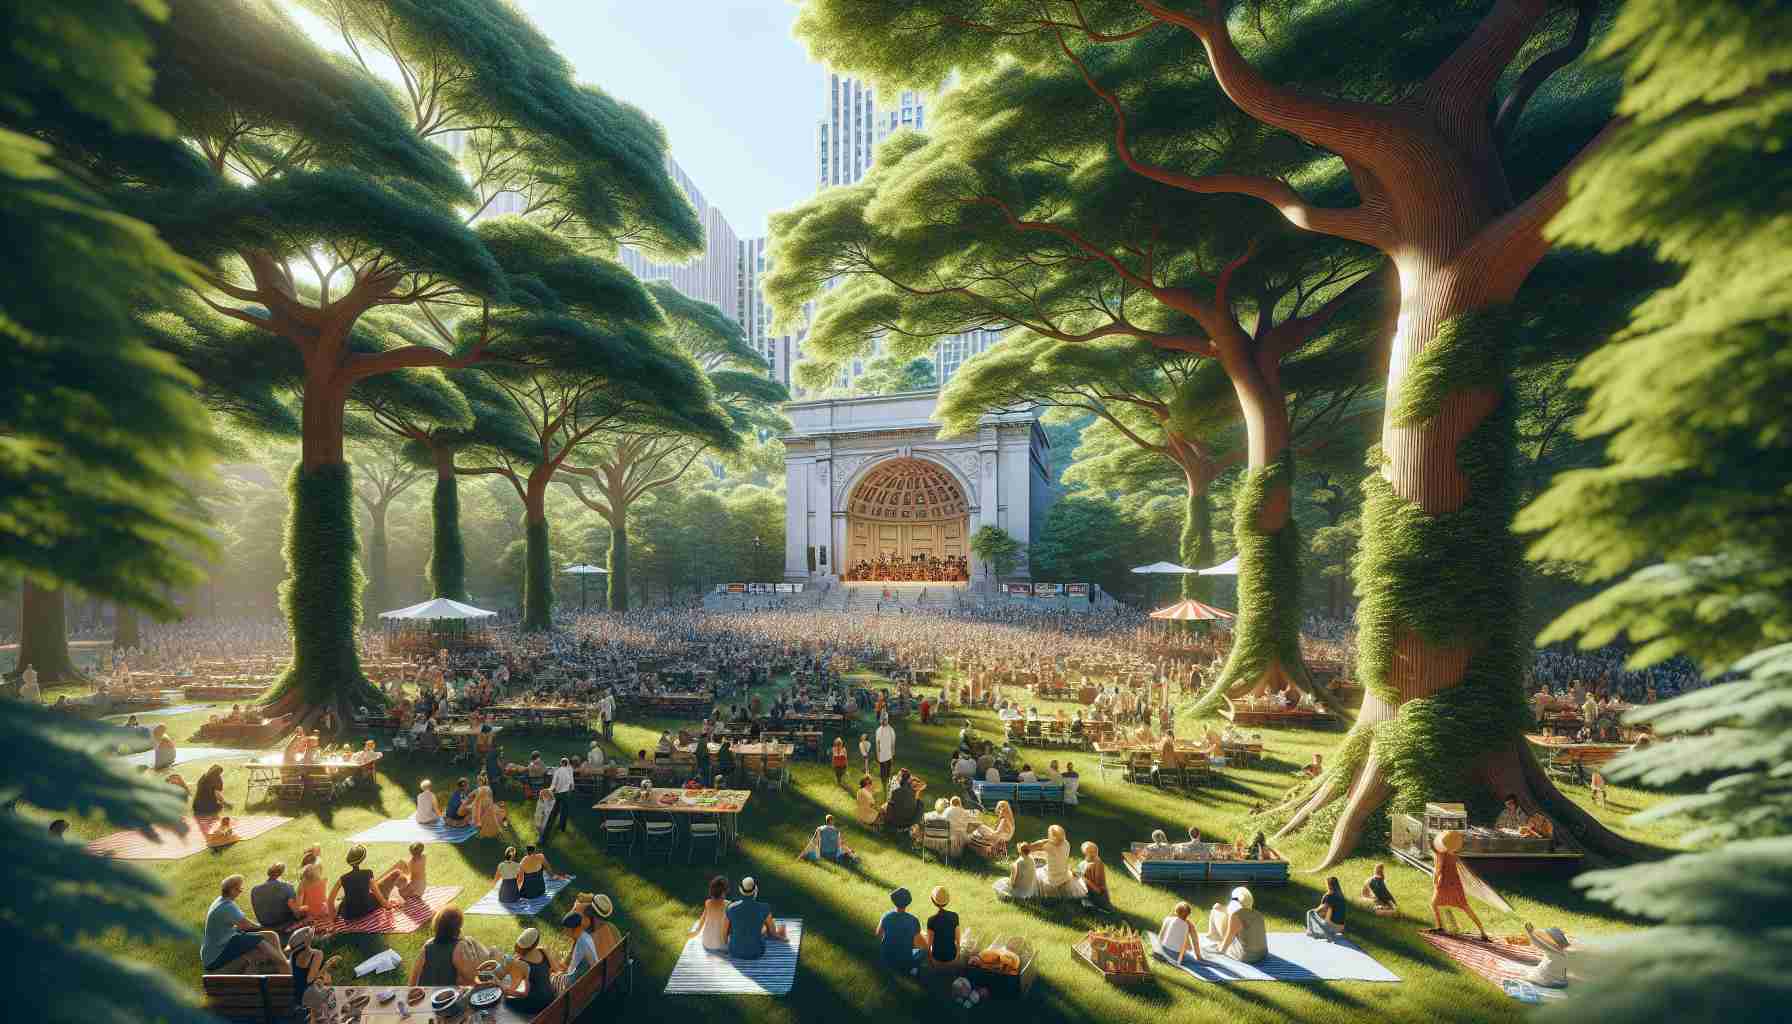 A high-definition, realistic image showcasing a summer serenade musical series unfolding at a lush, well-maintained park garnished with towering, mature trees. The environment is buzzing with people of varying descents such as Caucasian, Hispanic, Black, Middle-Eastern, South Asian, and White. They are all partaking in the lively event, with some listening to the music, others exploring food stalls, and the rest lounging on picnic blankets. The vibrant energy is amplified by the perfect summer day, with bright sunshine casting dappled shadows on the lush park ground.